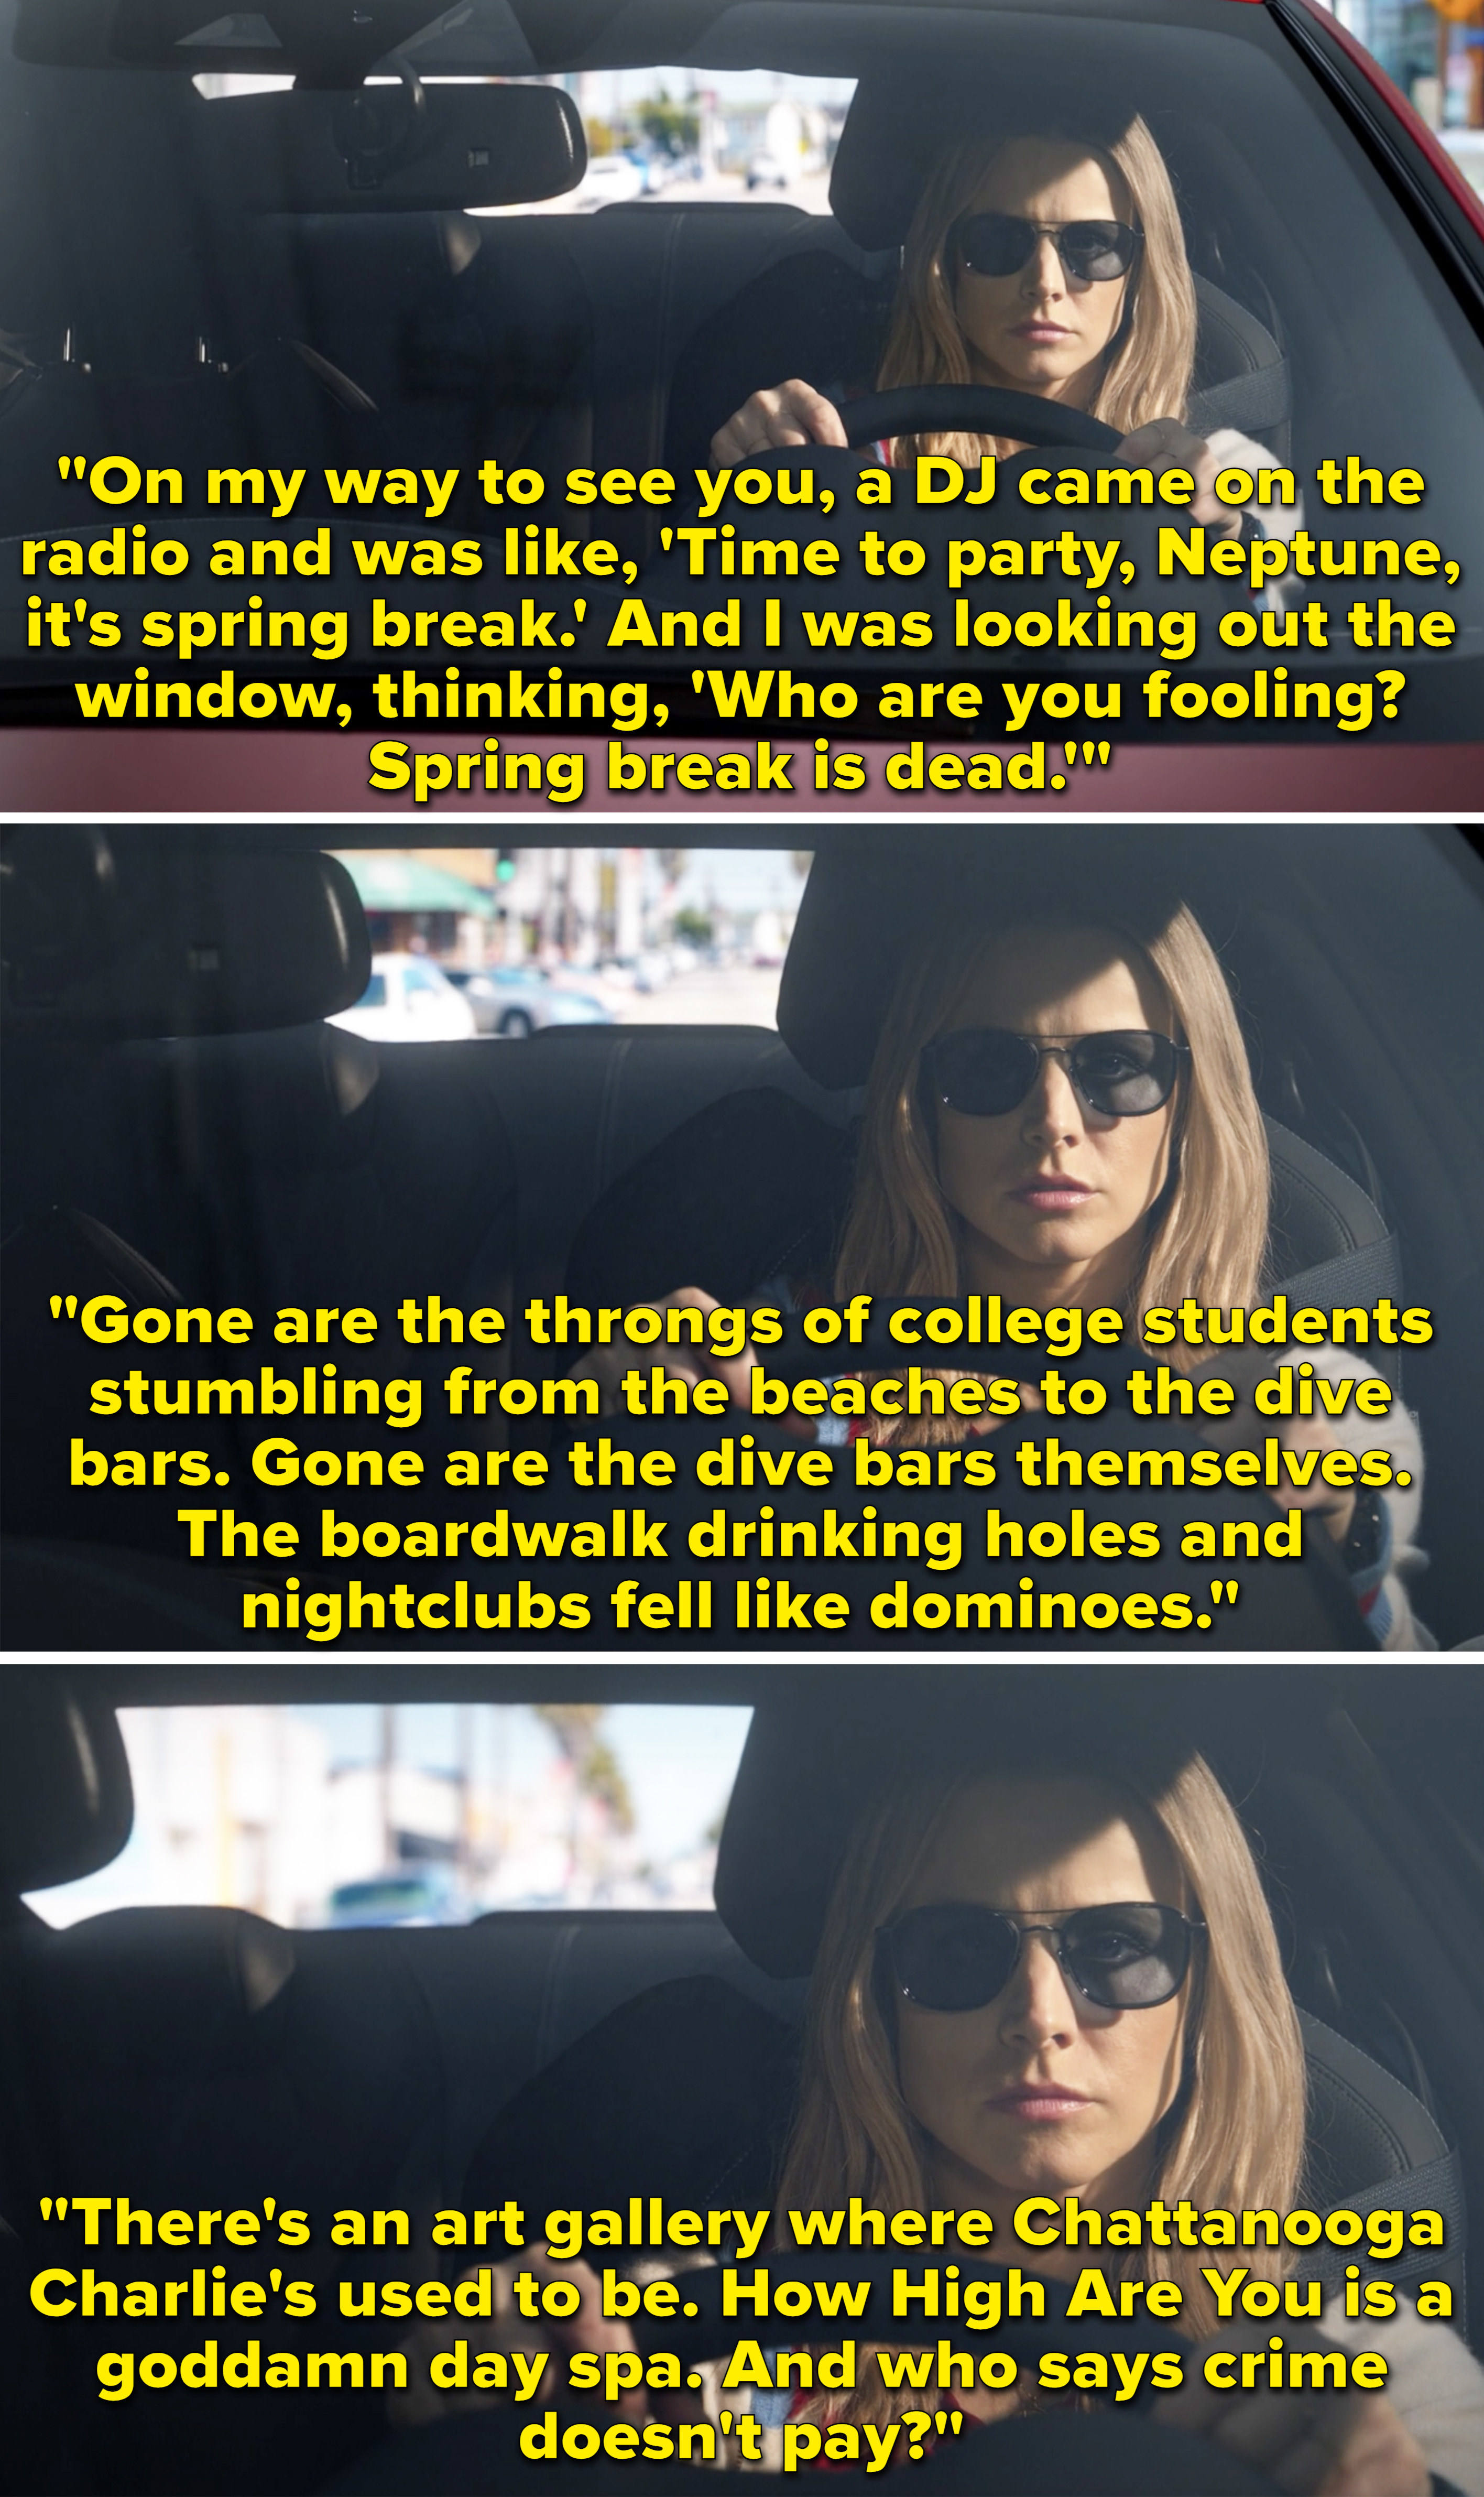 Veronica saying that the entire town of Neptune has changed at that spring break is dead